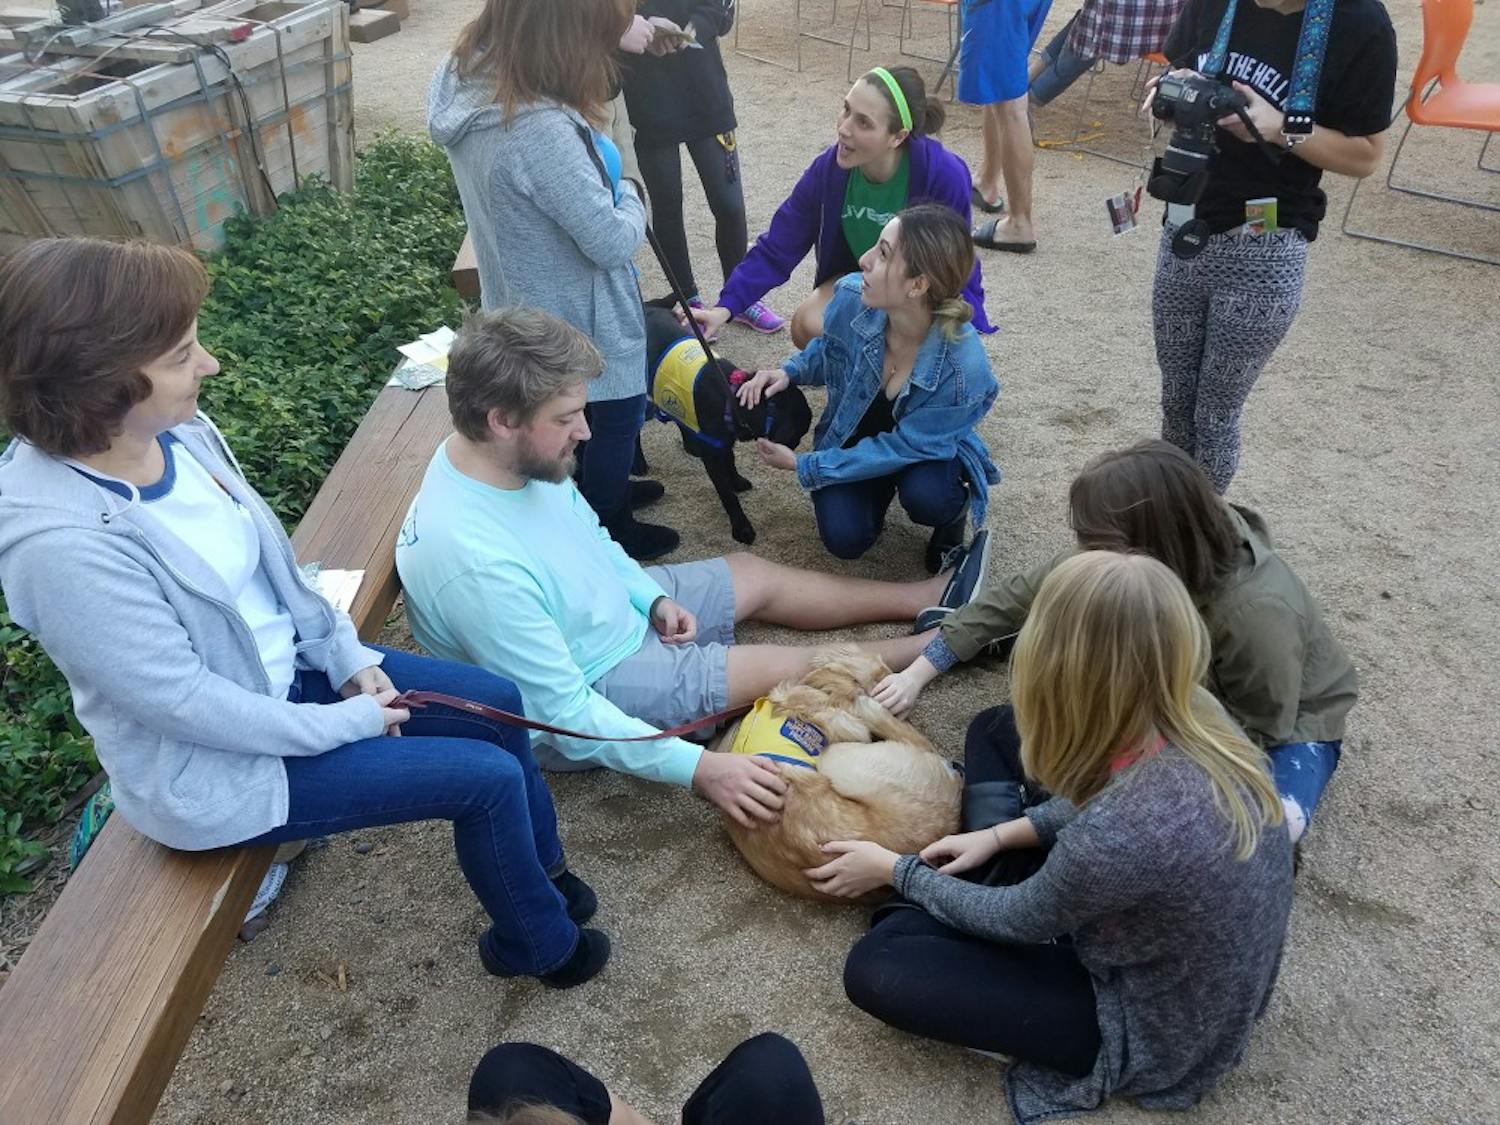 Students gather to pet and play with Canine Companions of Independence dogs at the Puppy Love event at the ASU downtown campus on Friday, Feb. 24, 2017.